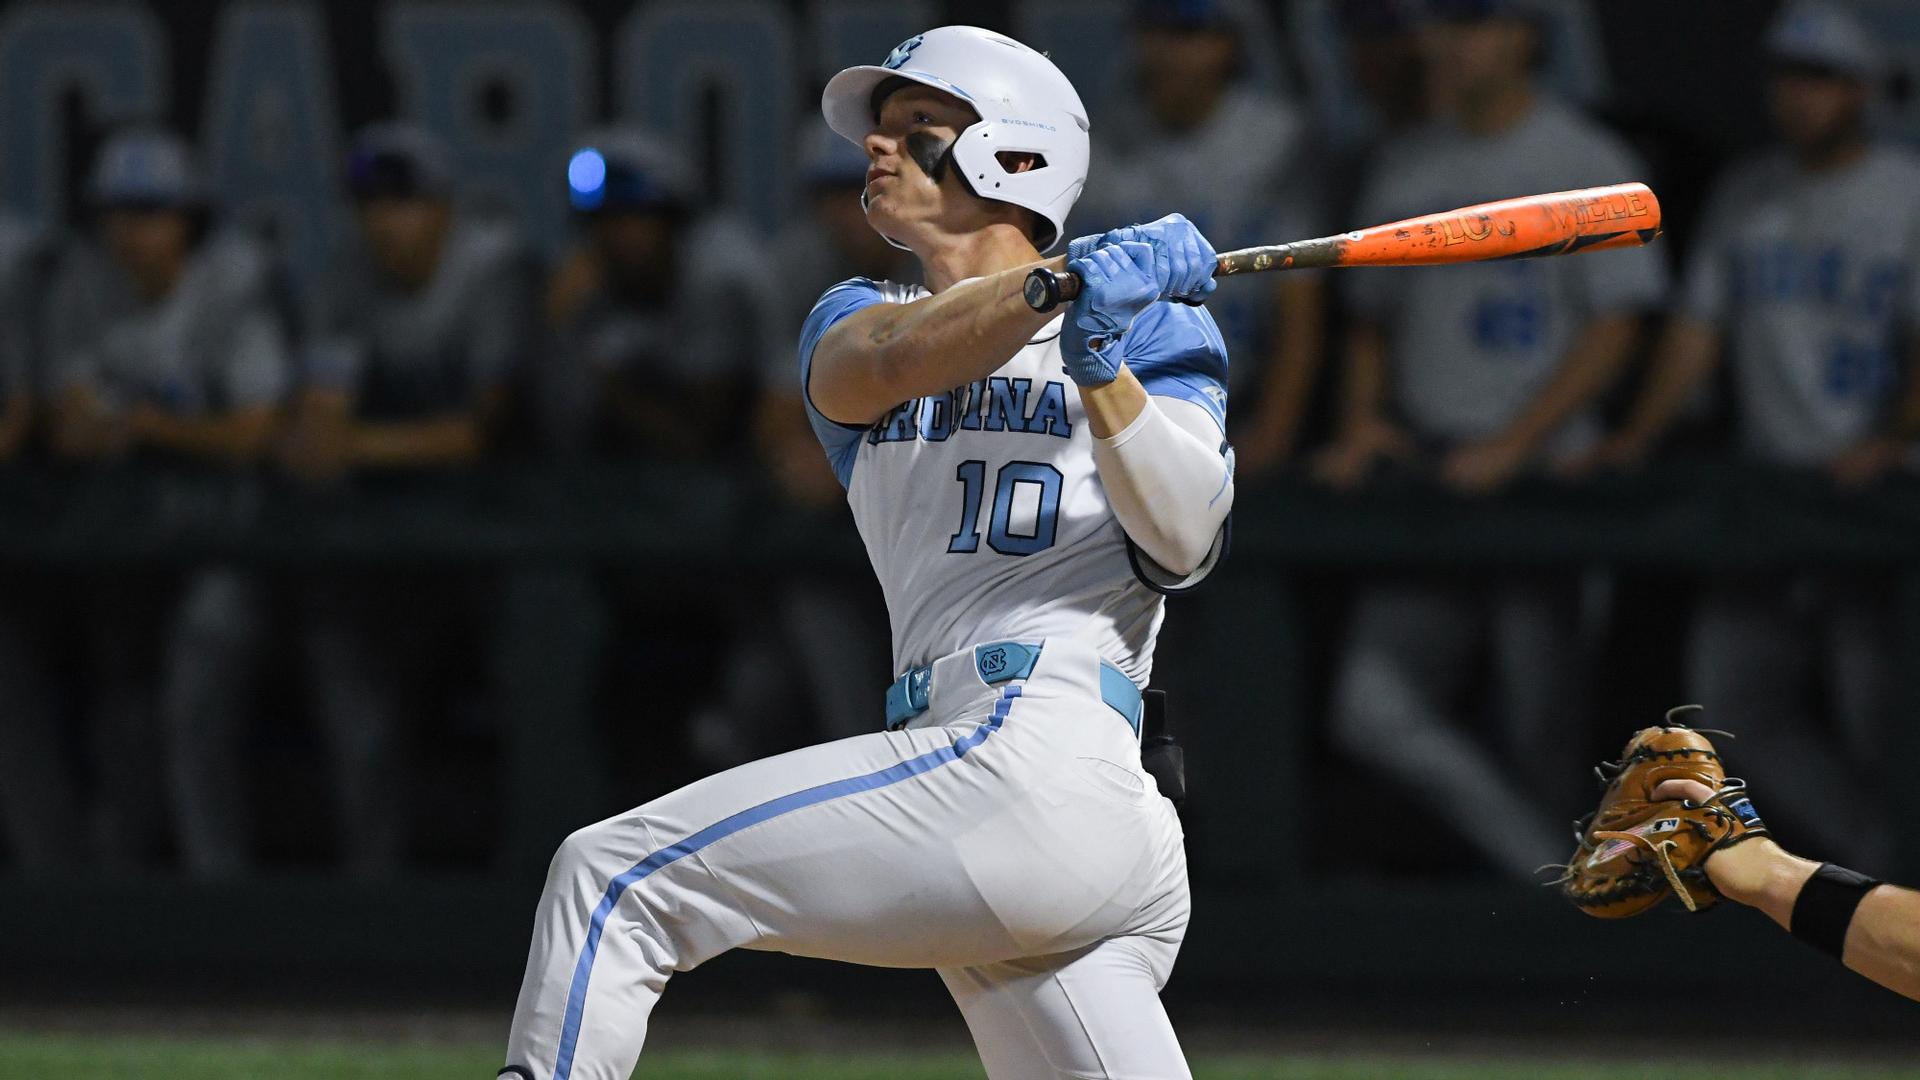 UNC Baseball vs. South Carolina How to Watch, CordCutting Options and